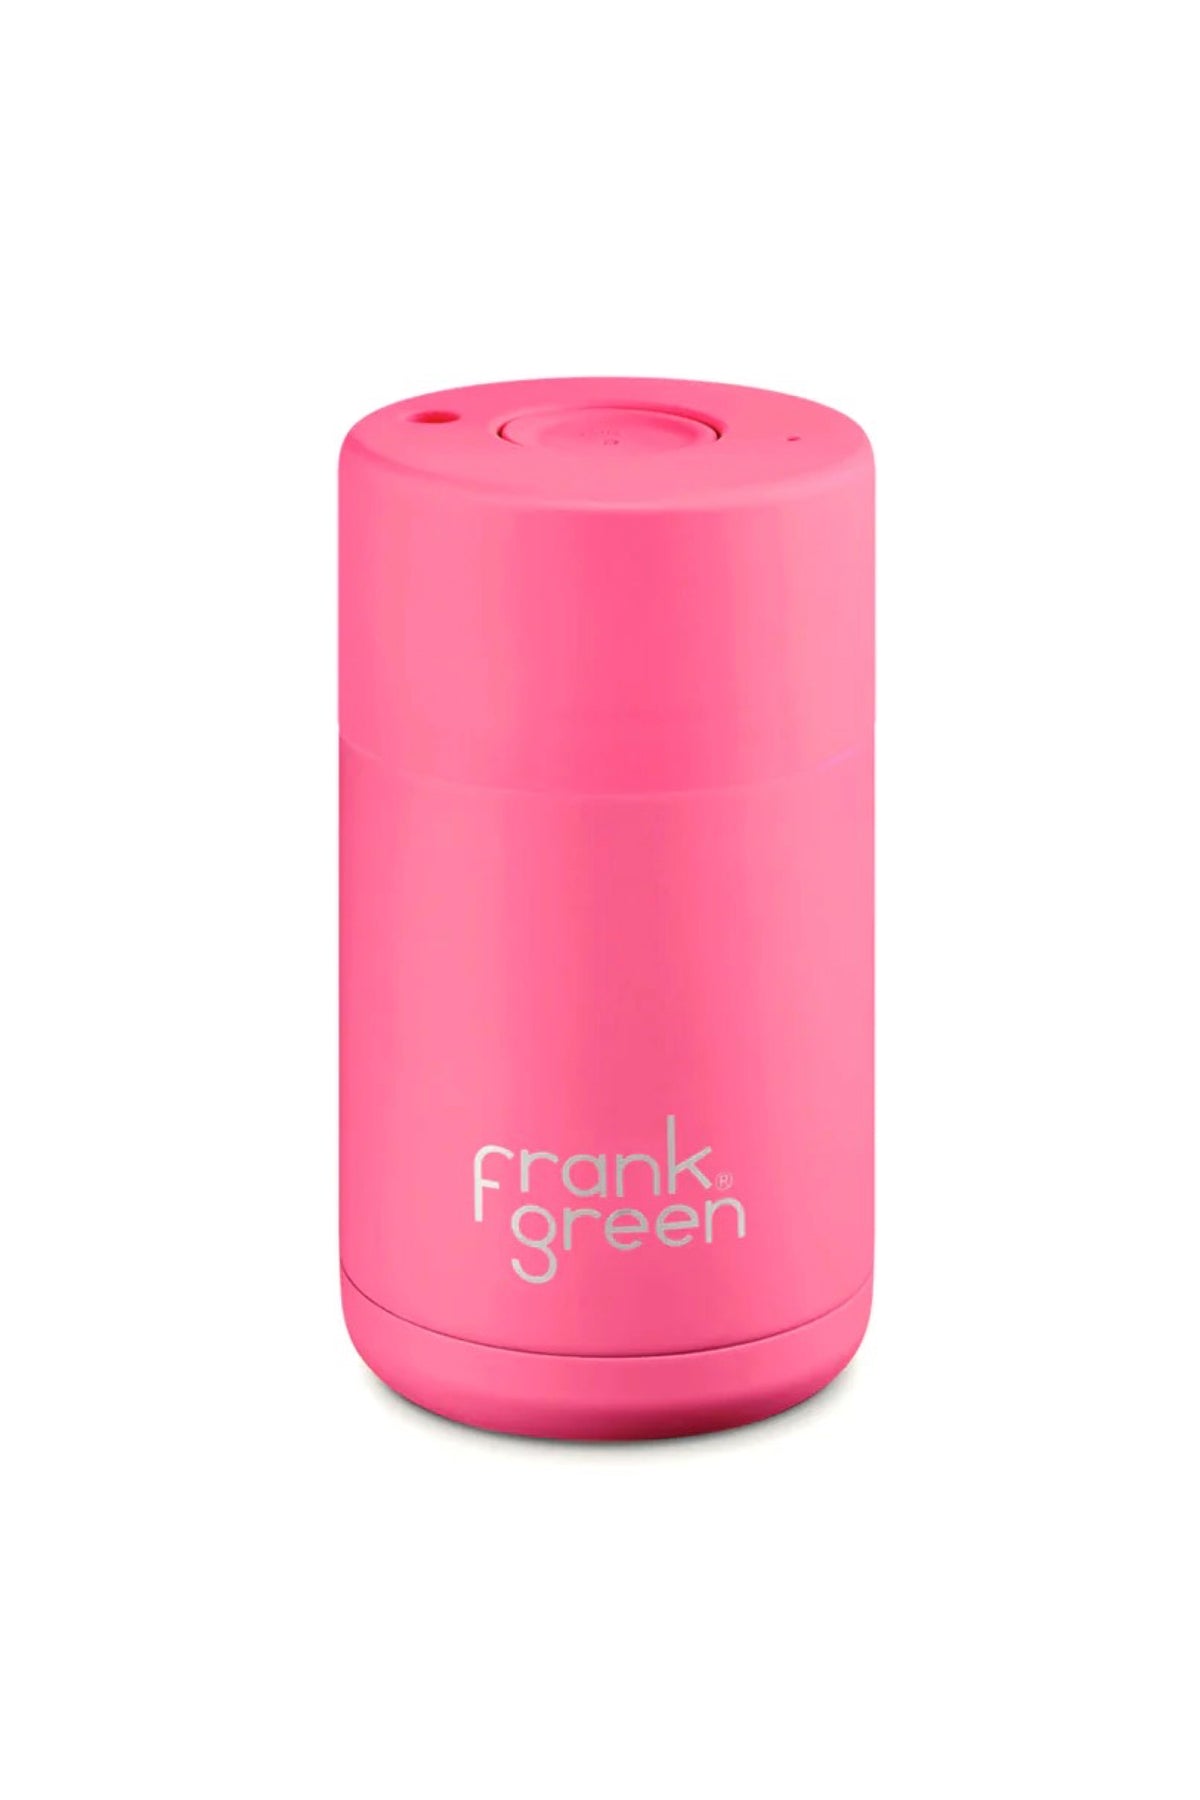 10oz Ceramic Reusable Cup Neon Pink With Push Button Lid